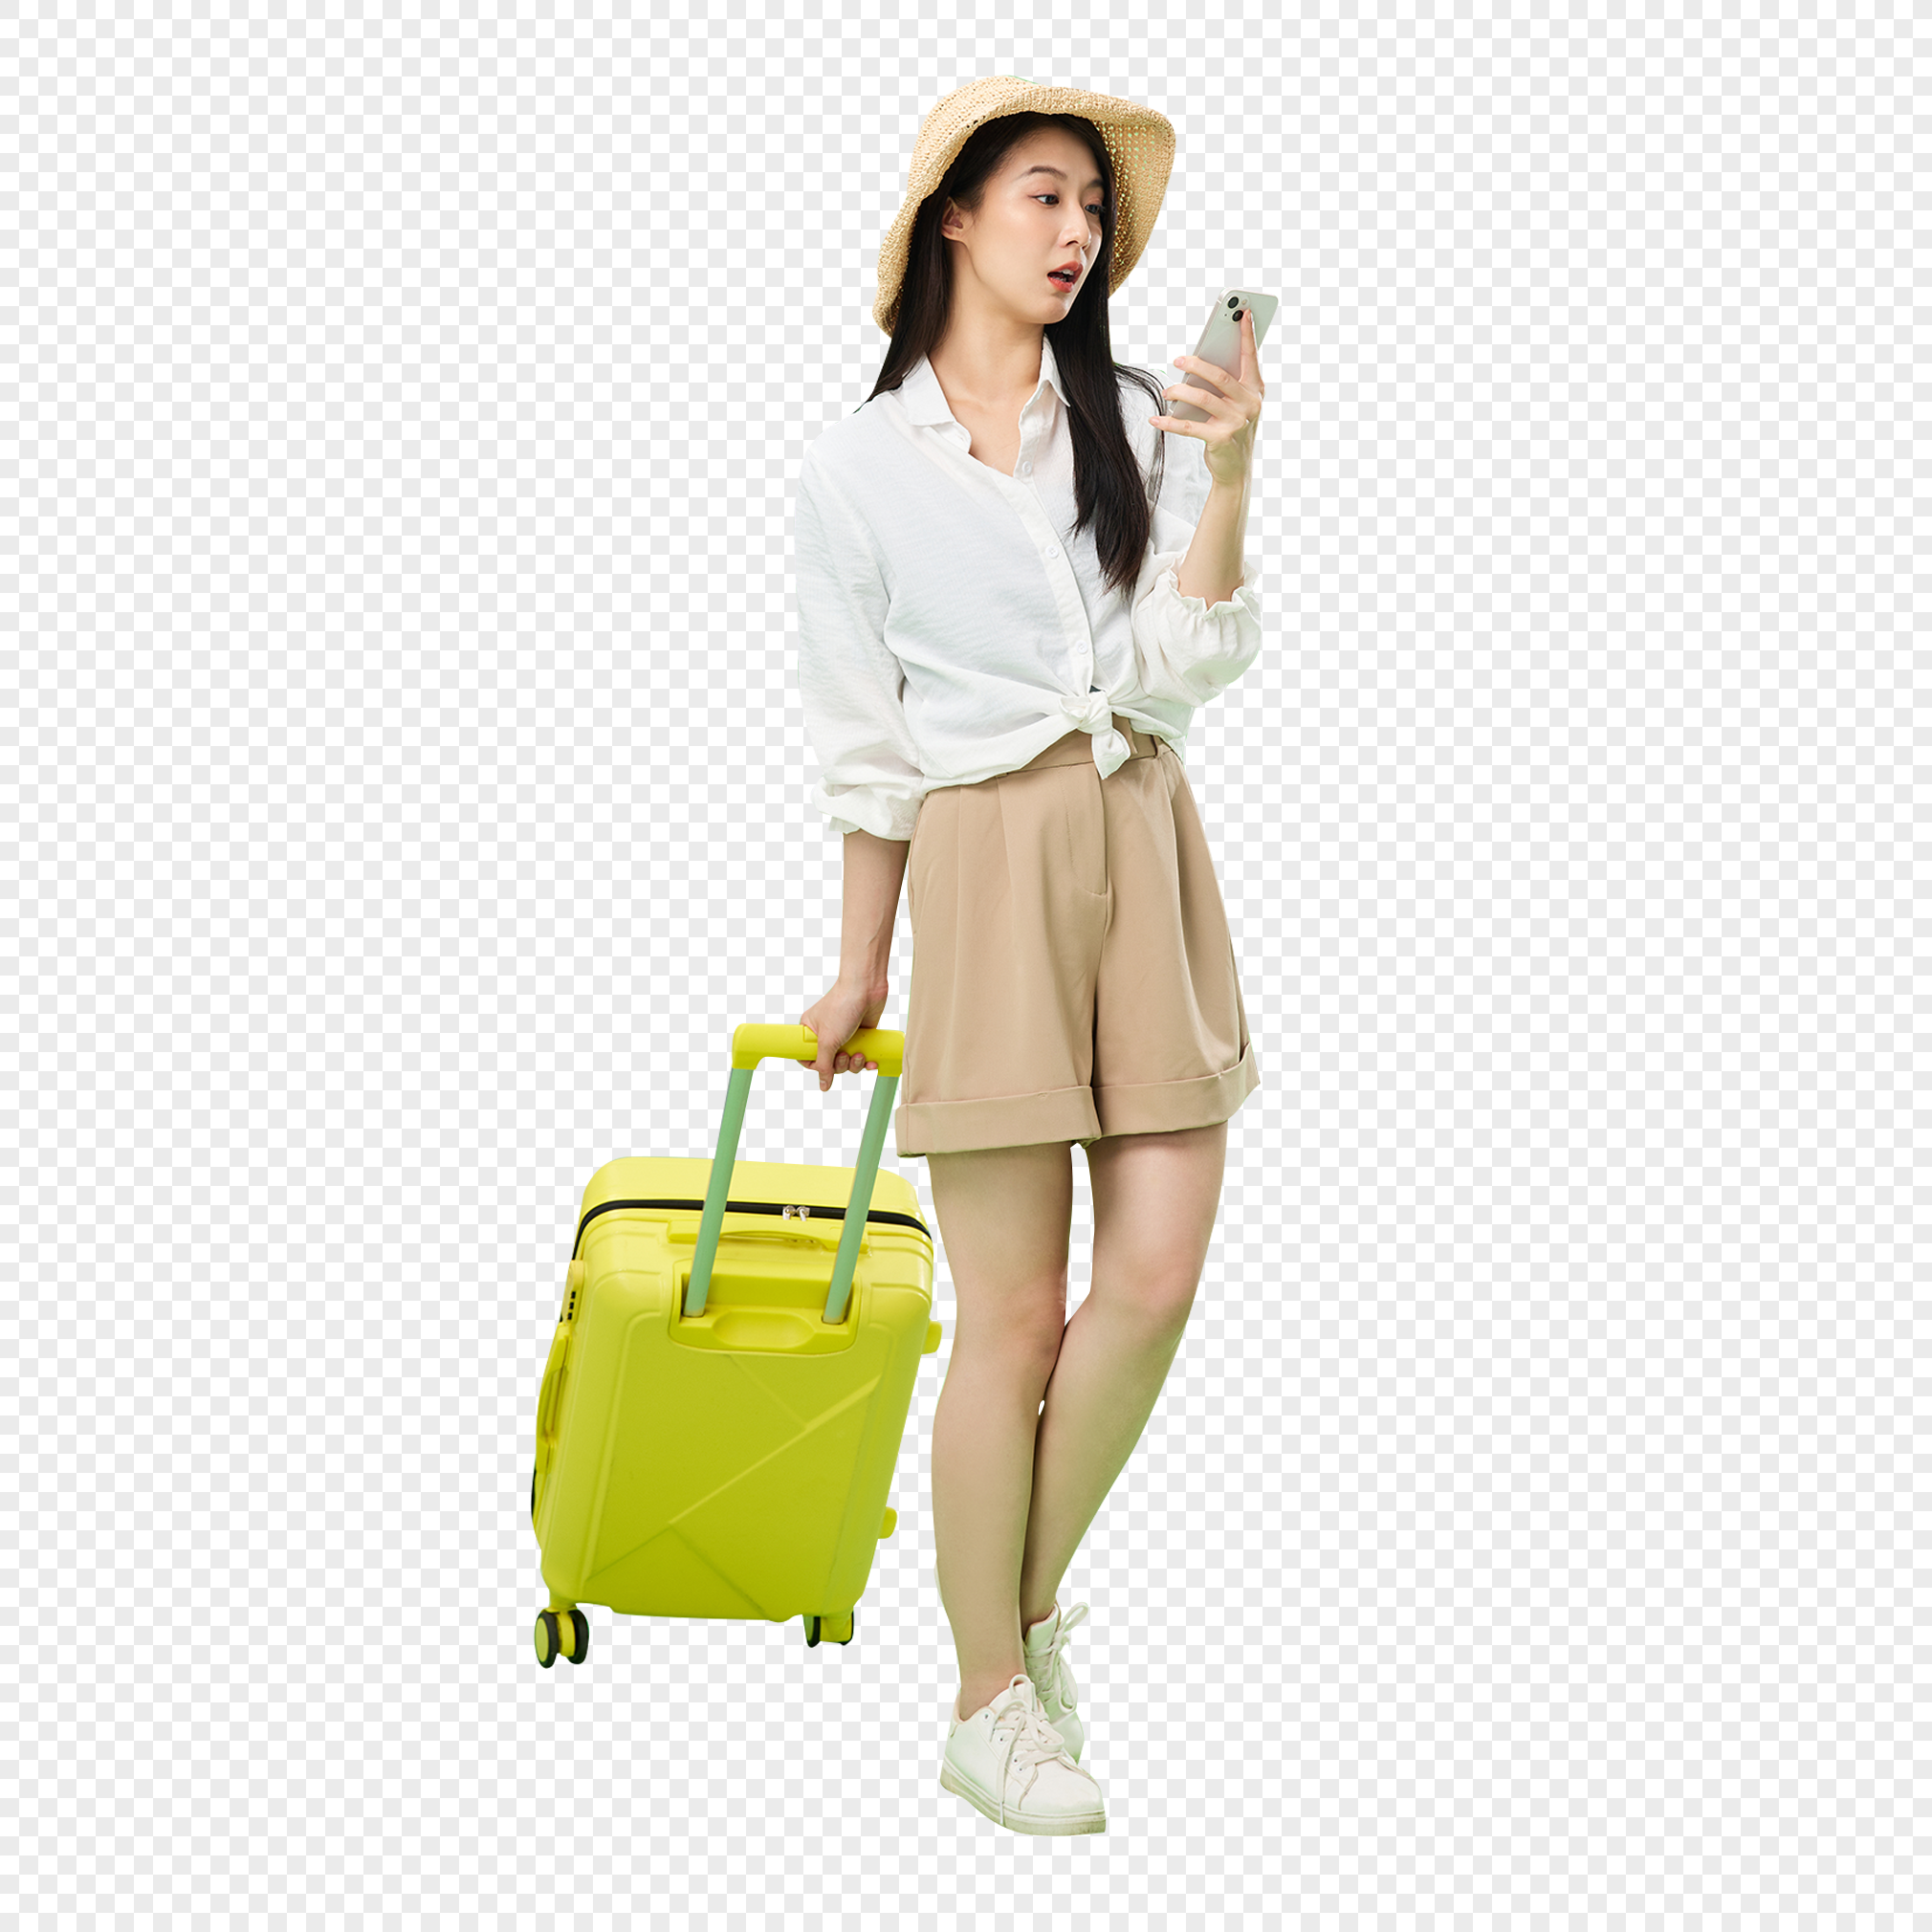 Young energetic girl checking mobile phone while traveling on vacation, young, mobile phone, click png hd transparent image